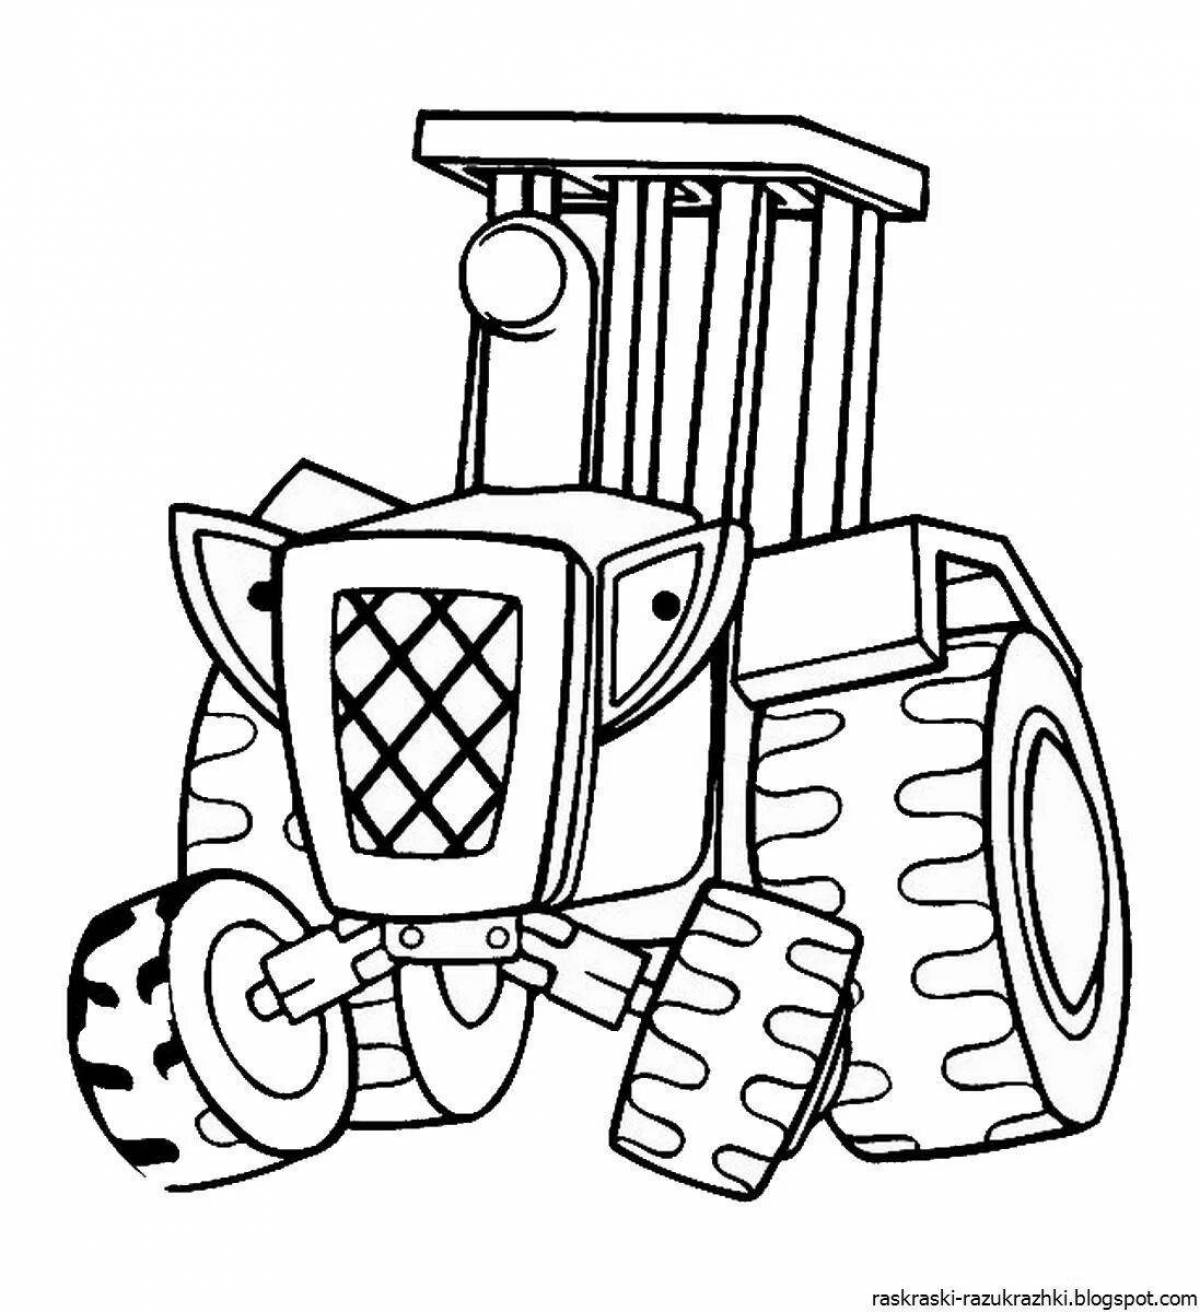 Playful tractor drawing for kids